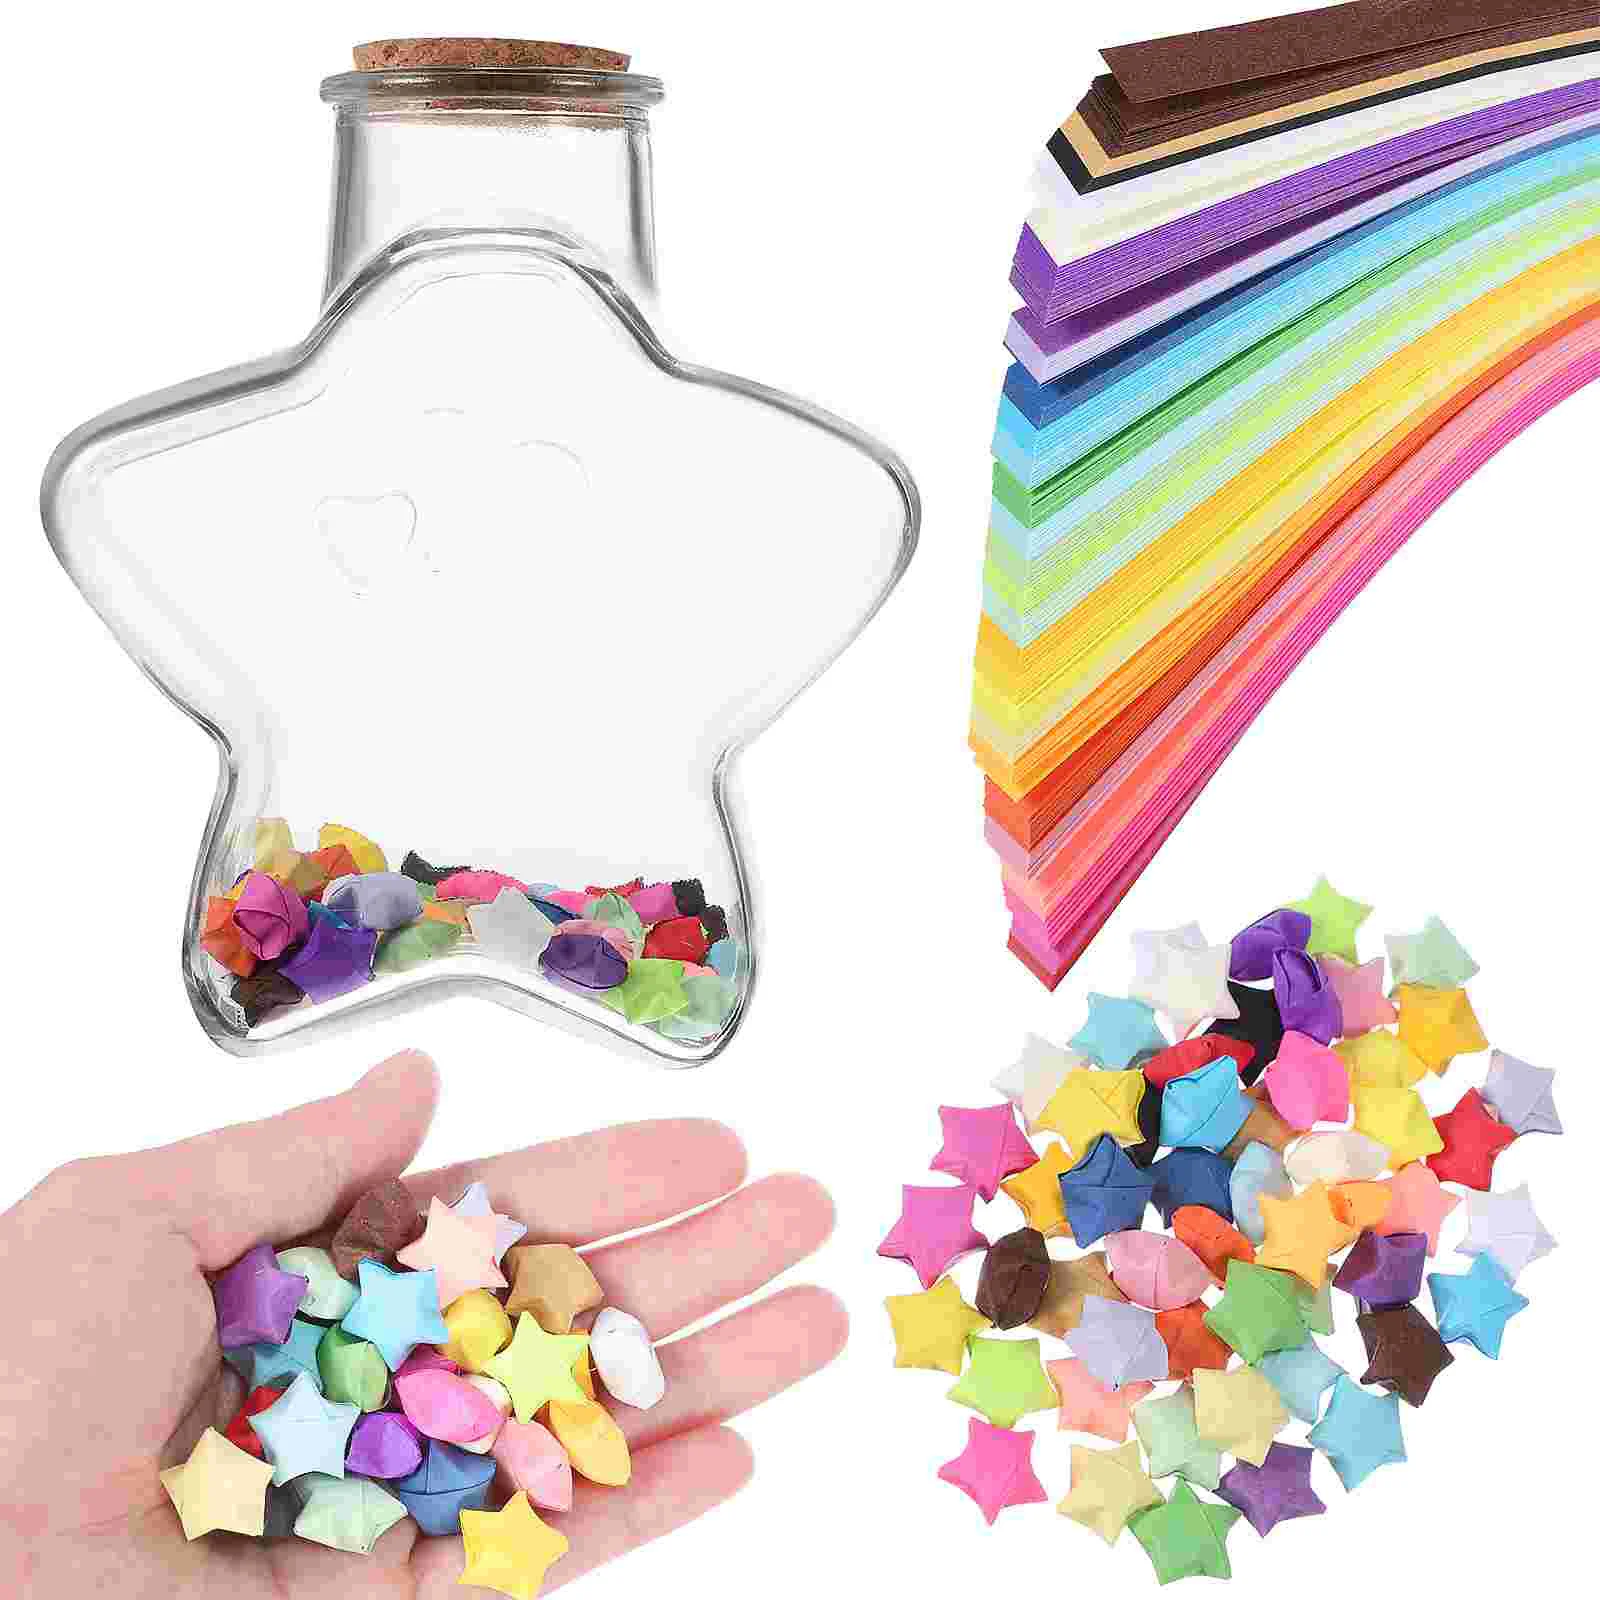 

540 Sheets Rainbow Origami Star Paper Strips with Glass Wishing Bottle for Birthday Gift Room Decoration